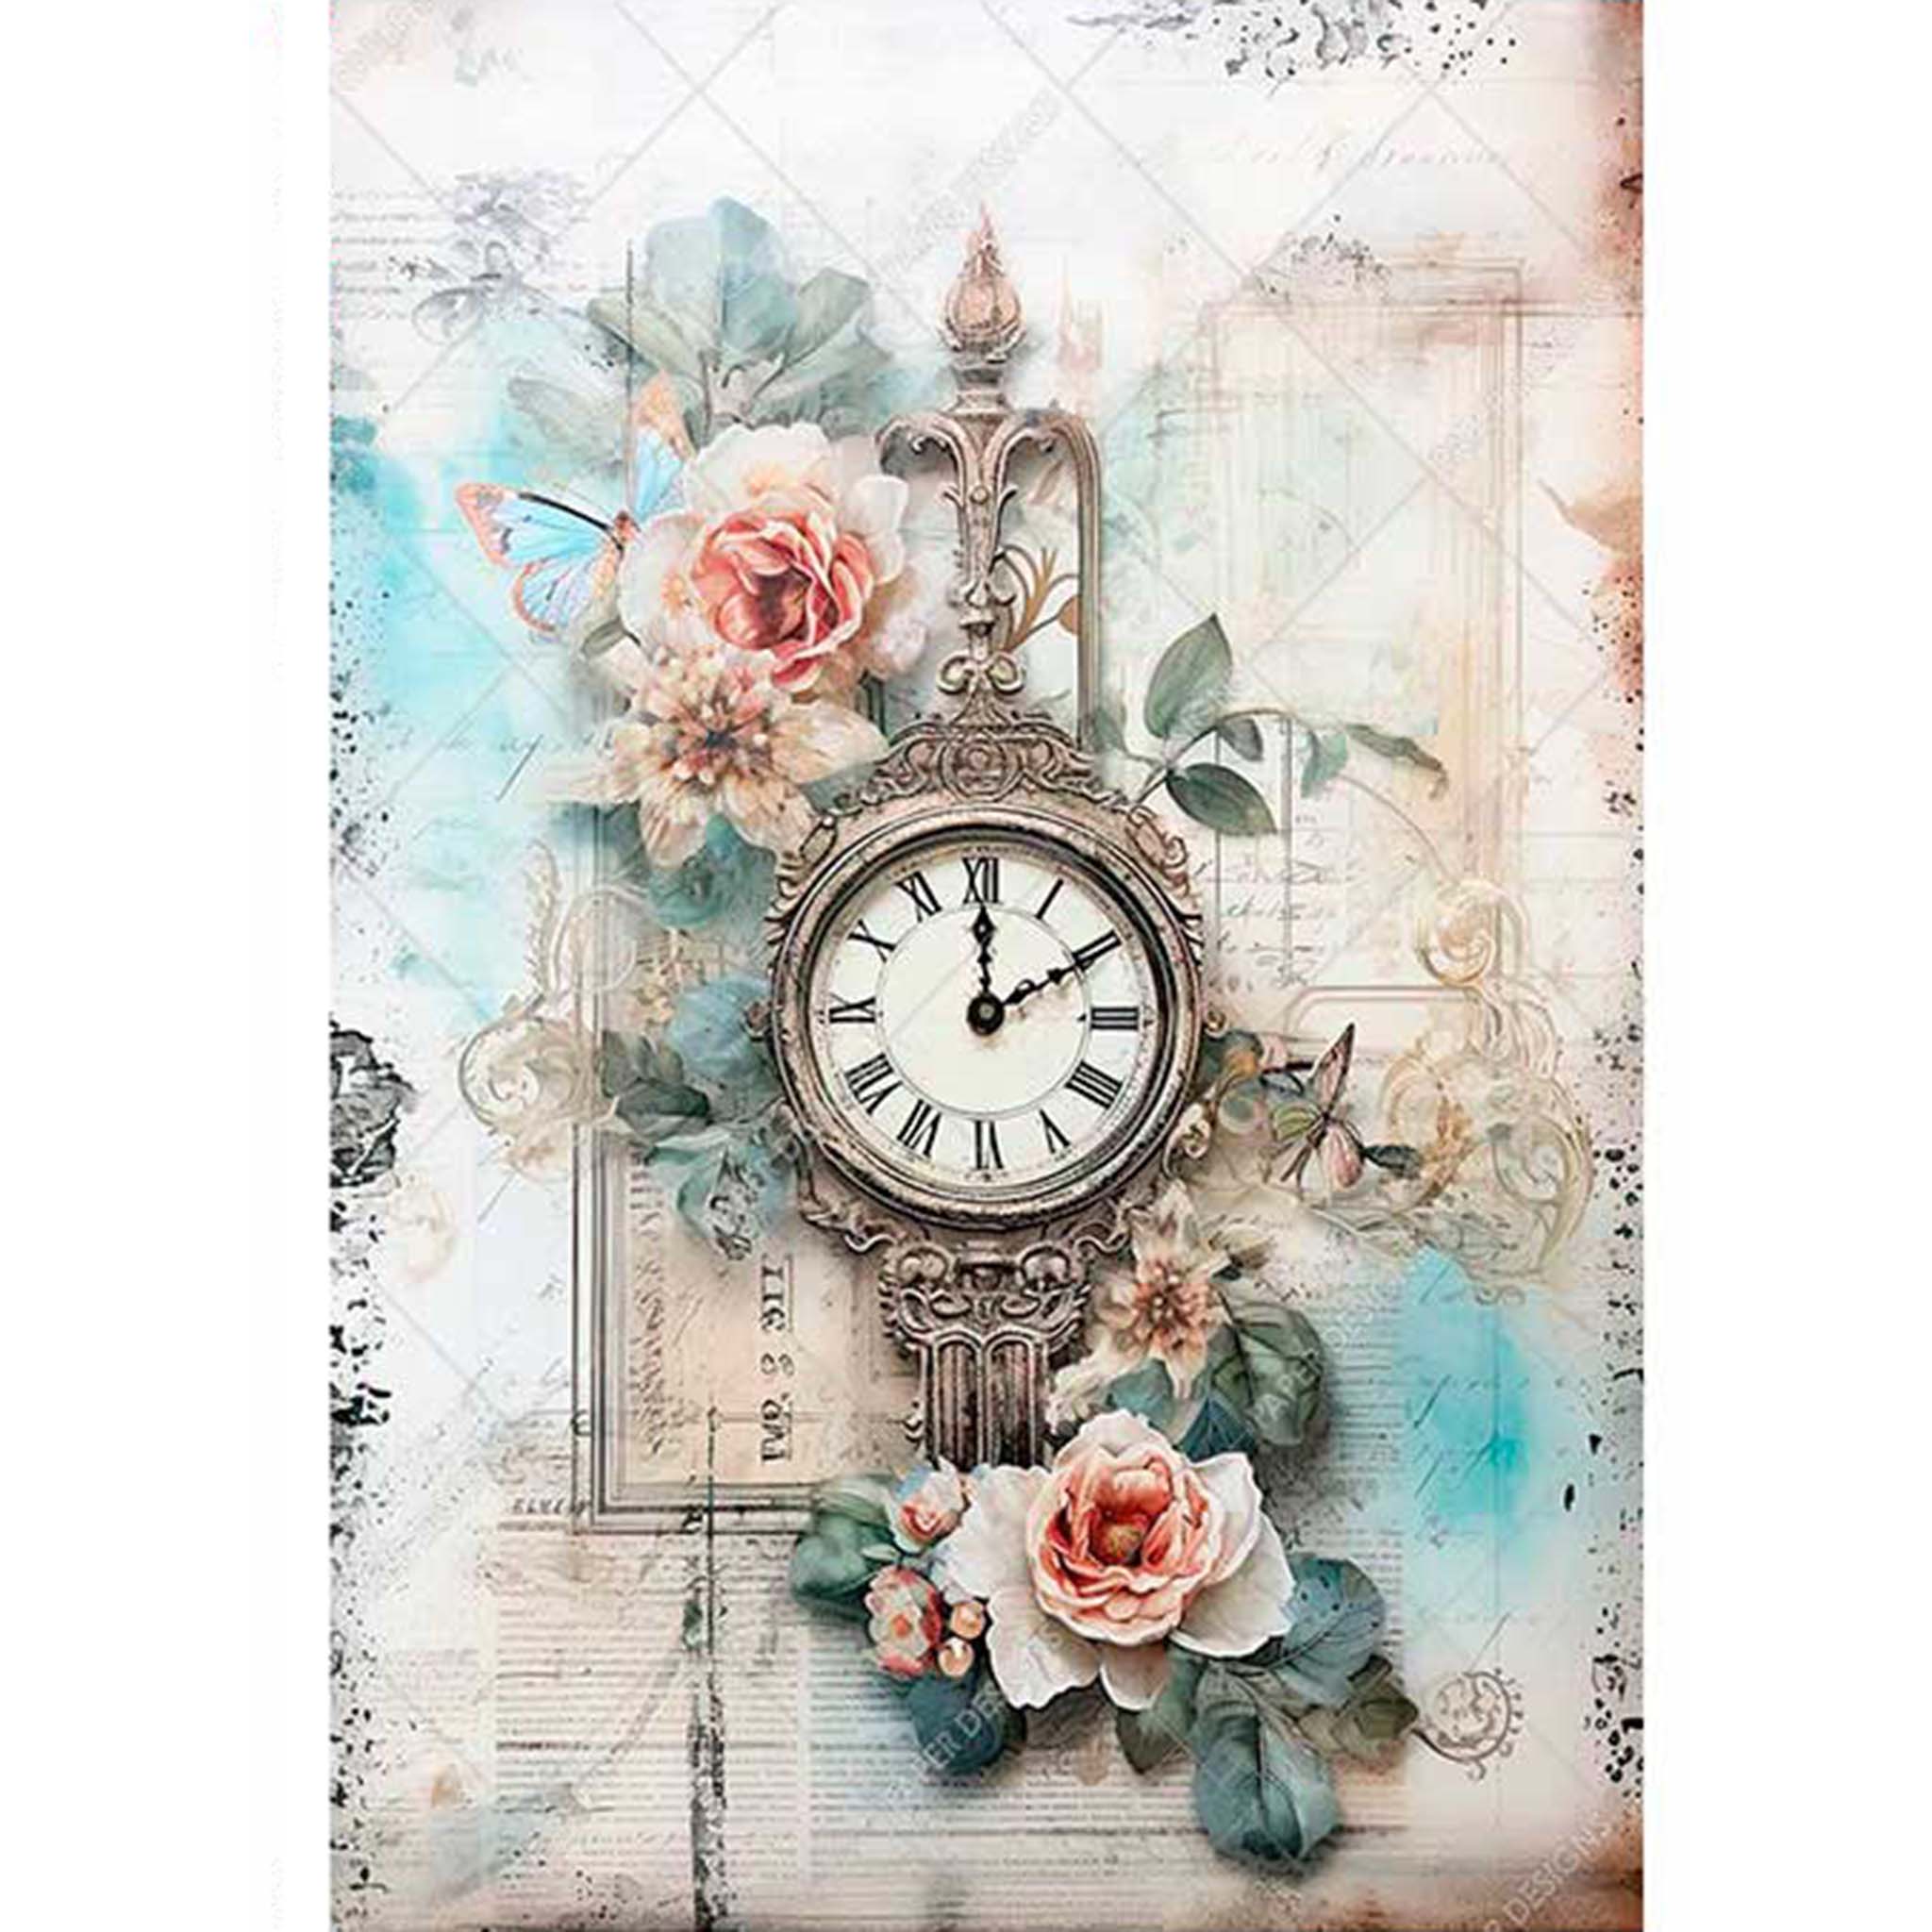 A2 rice paper design featuring an ornate clock surrounded by exquisite flowers. White borders are on the sides.